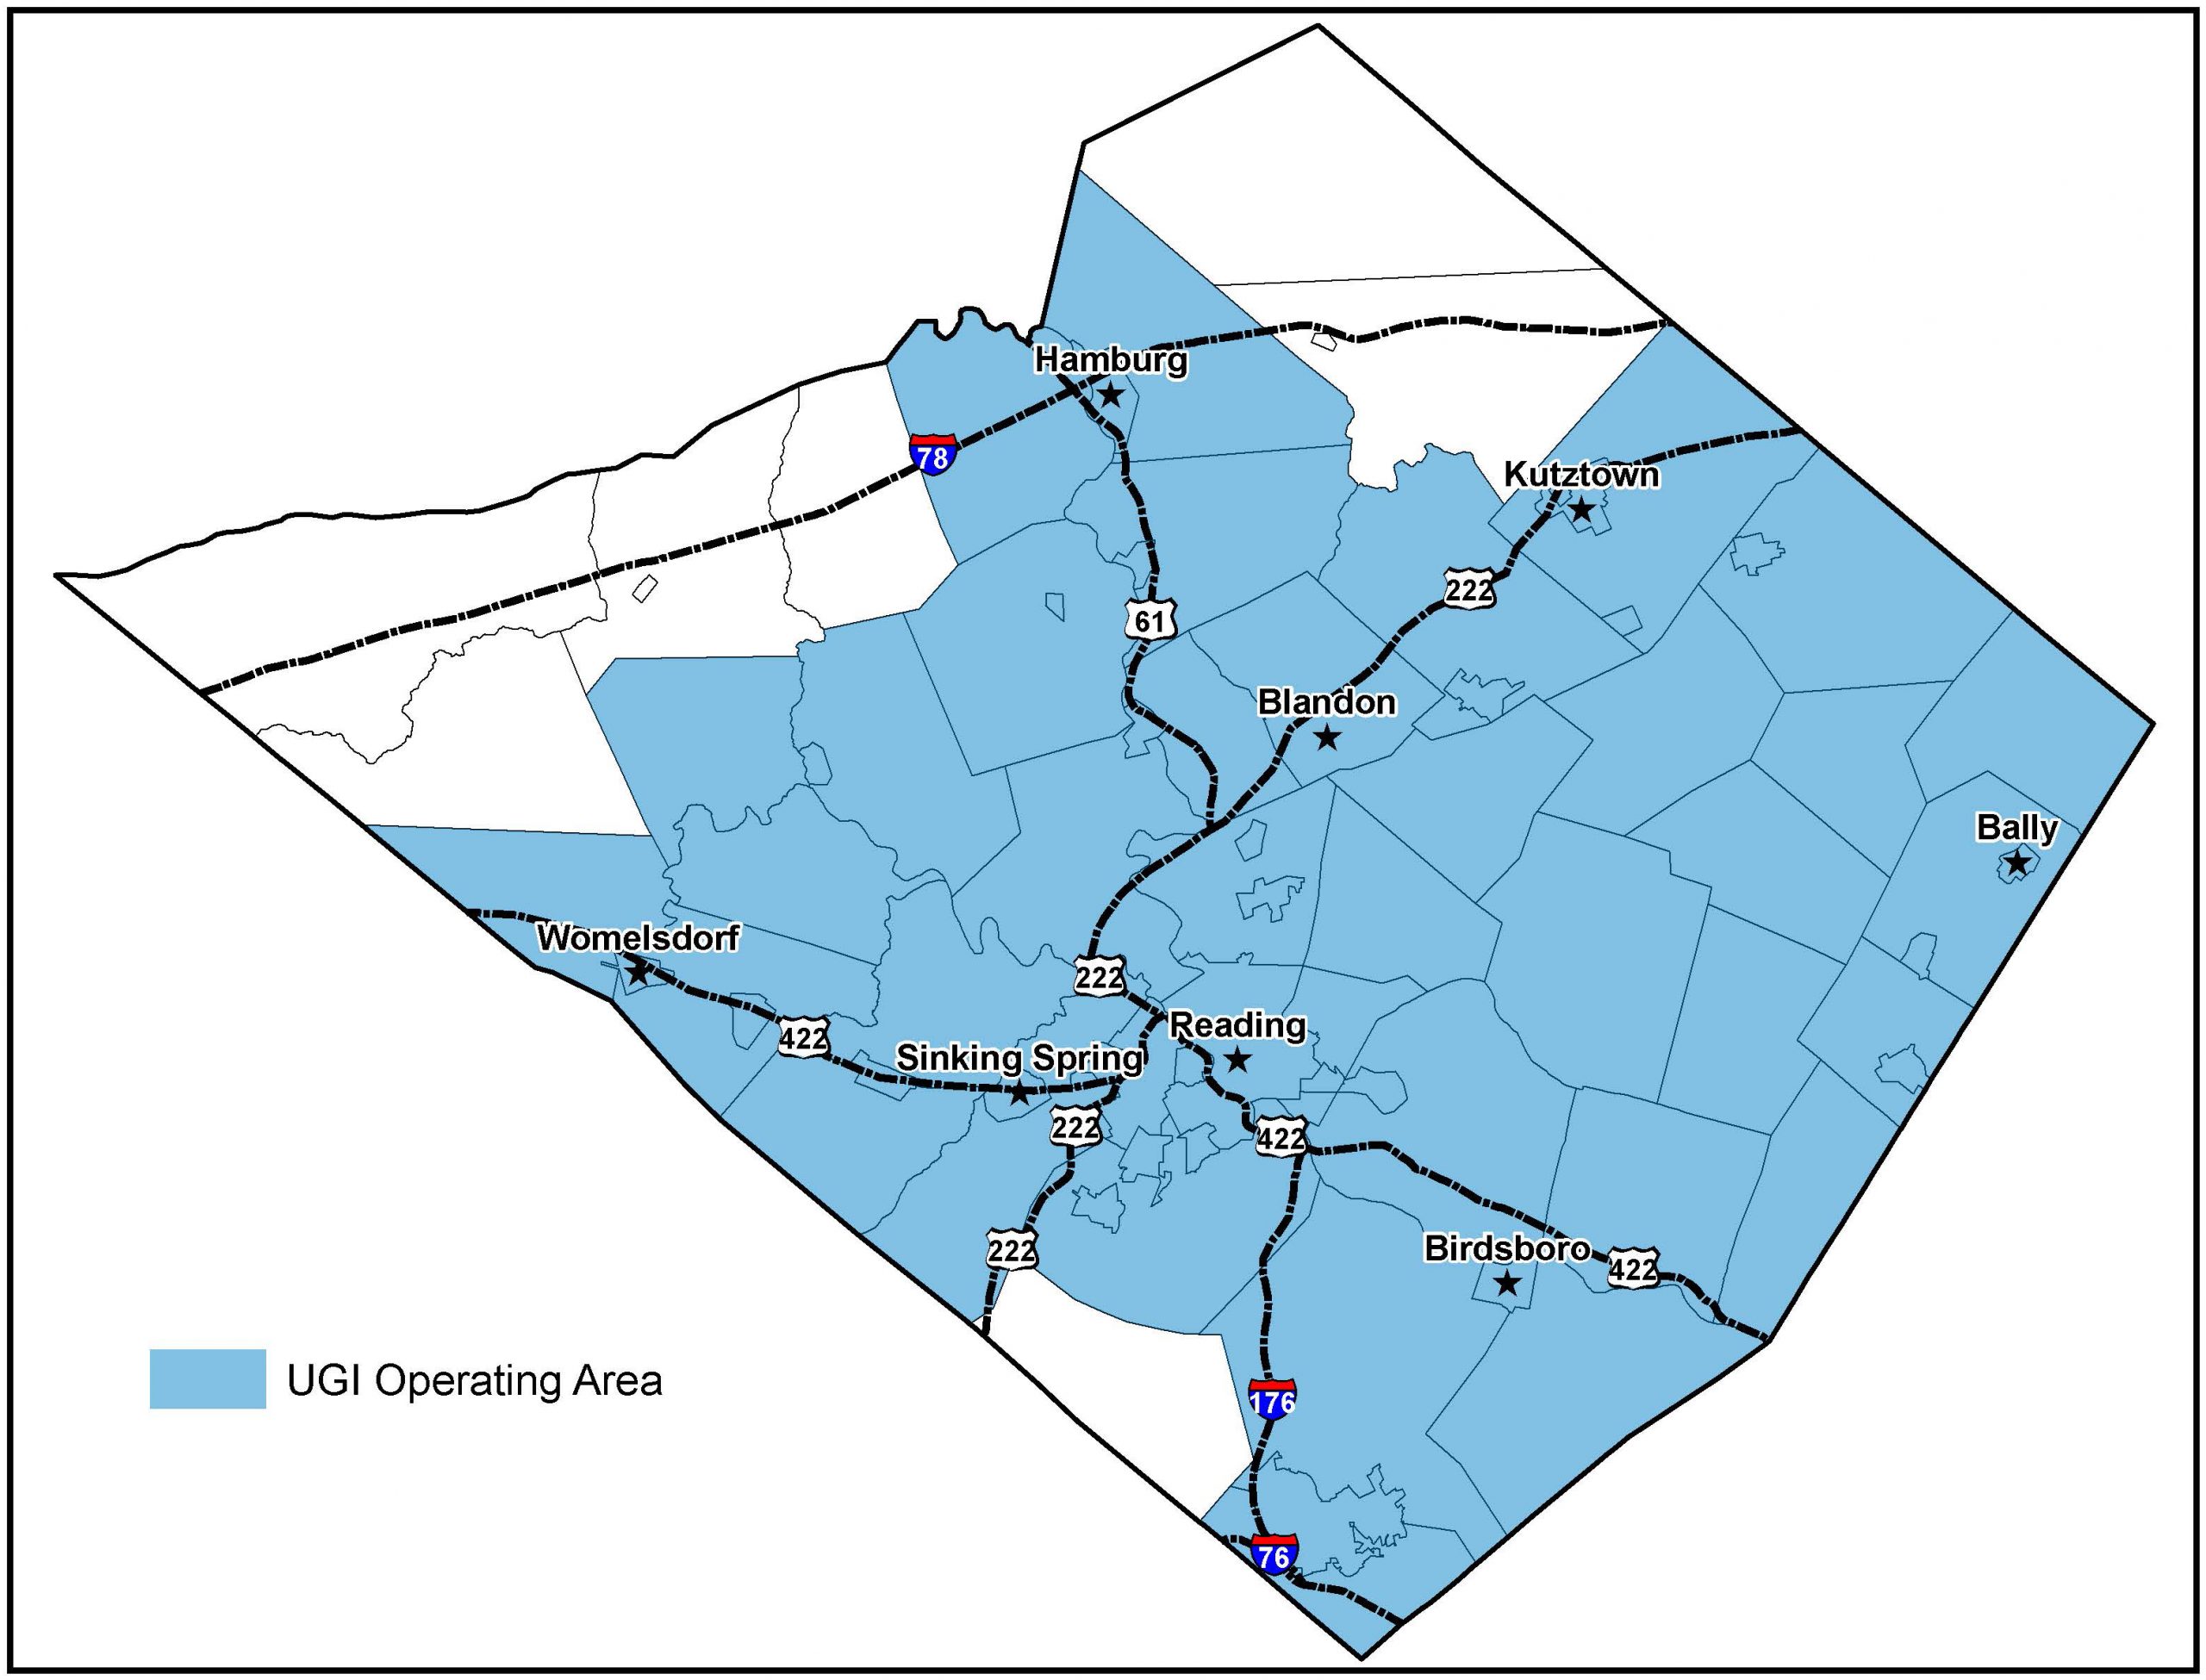 Map of Berks County PA with some of the major towns and cities such as Reading, Sinking Spring, Birdsboro, Womelsdorf, Hamburg, Kutztown, and Bally. UGI natural gas territory is shaded blue.